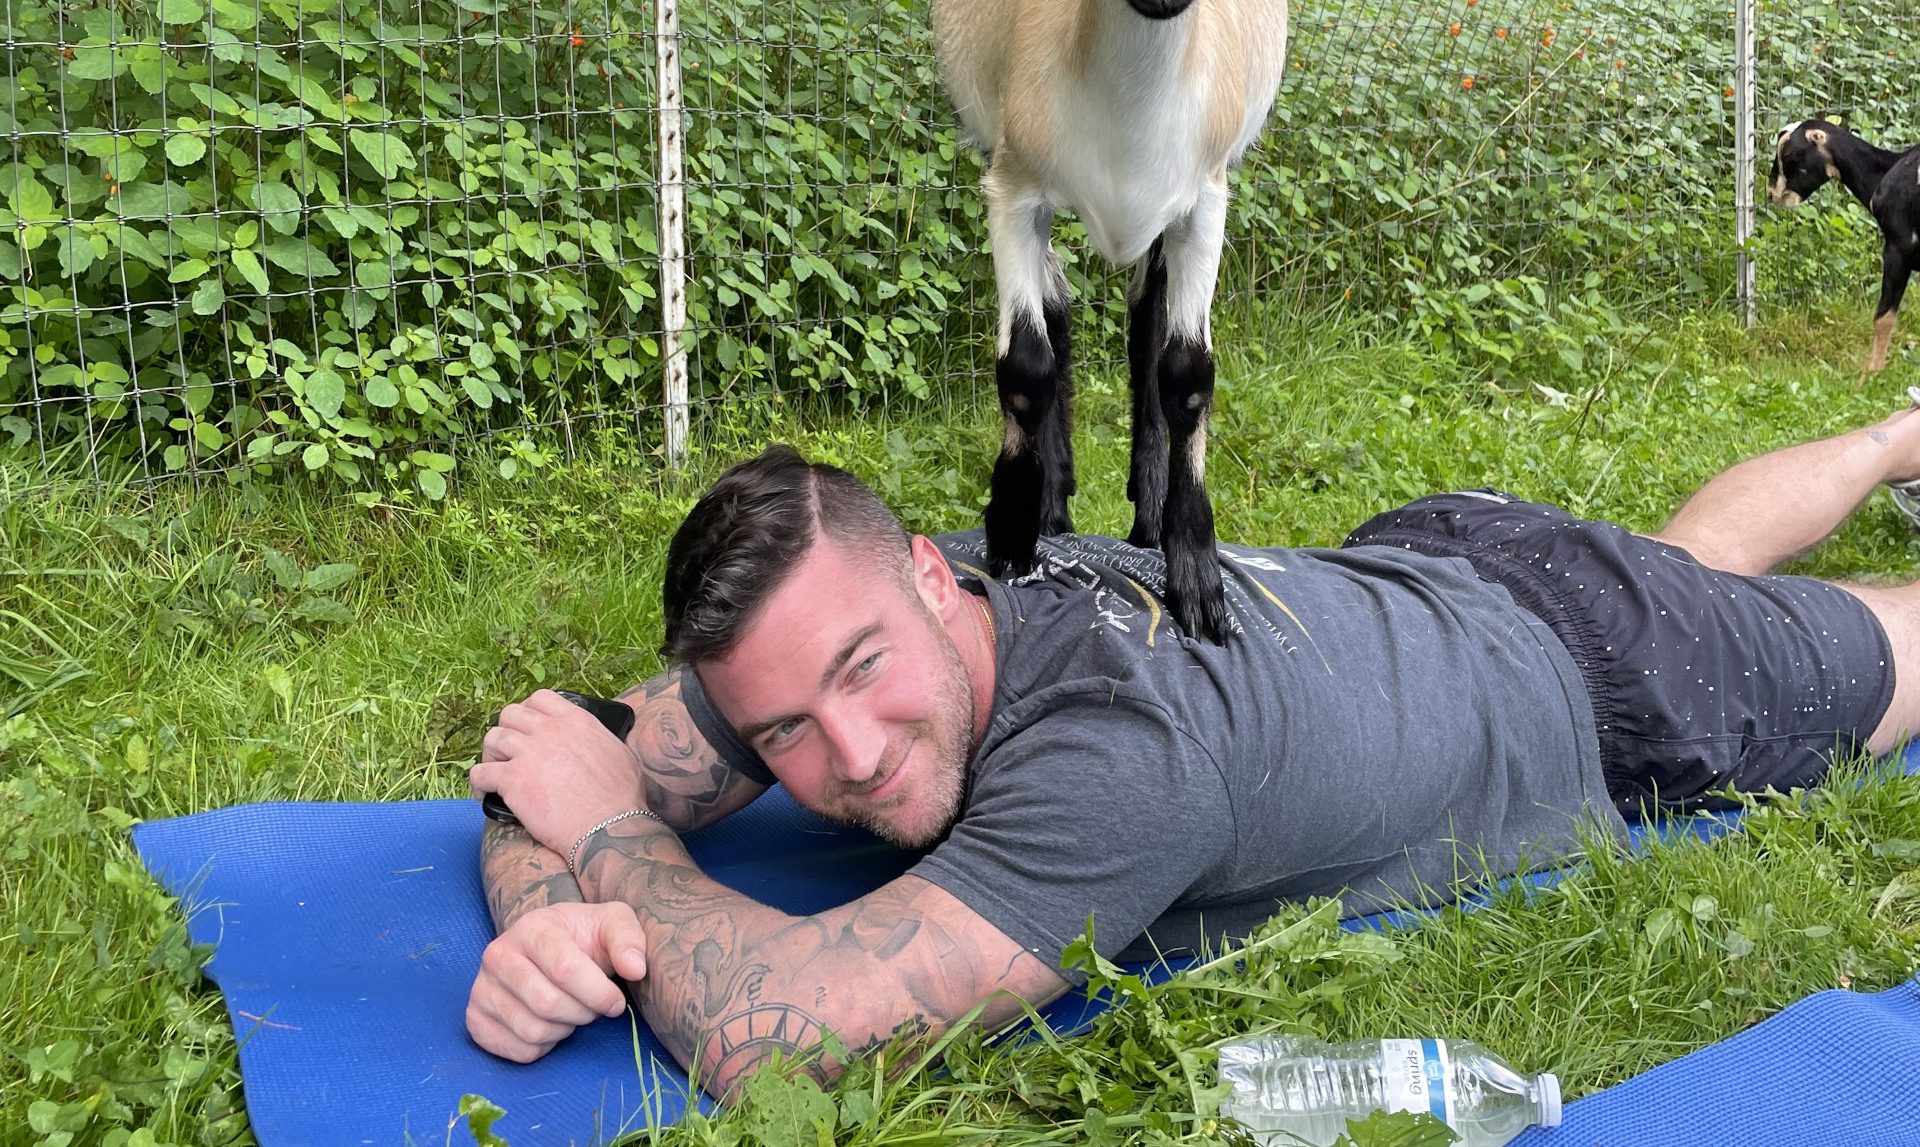 Goat standing on back of man during a goat yoga session for bachelor party.